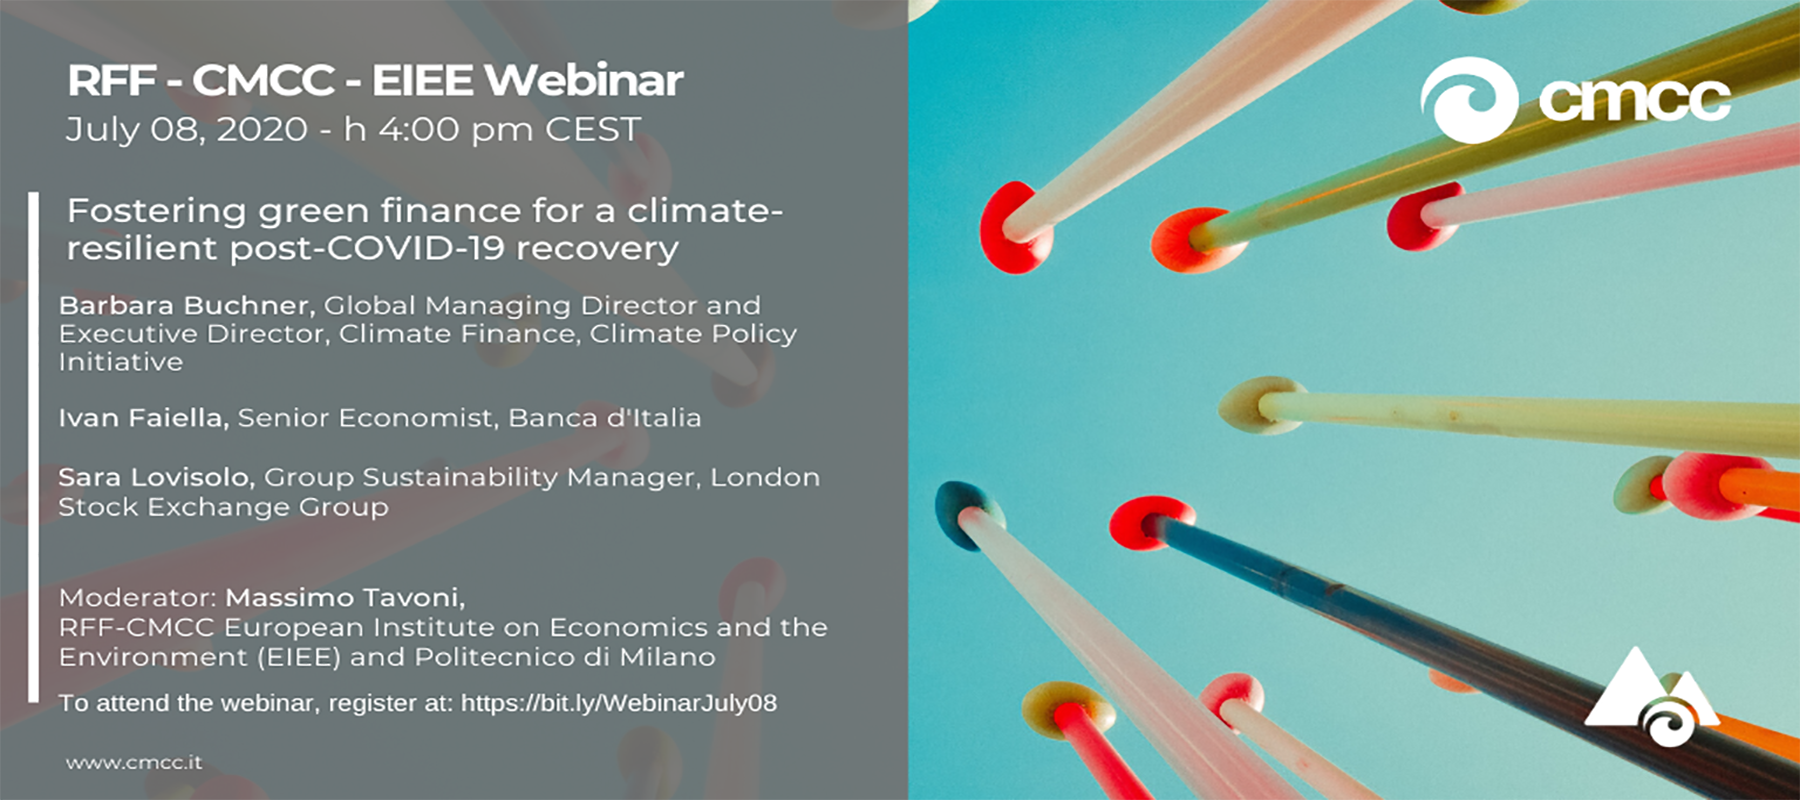 Webinar: Fostering green finance for a climate-resilient post-COVID-19 recovery